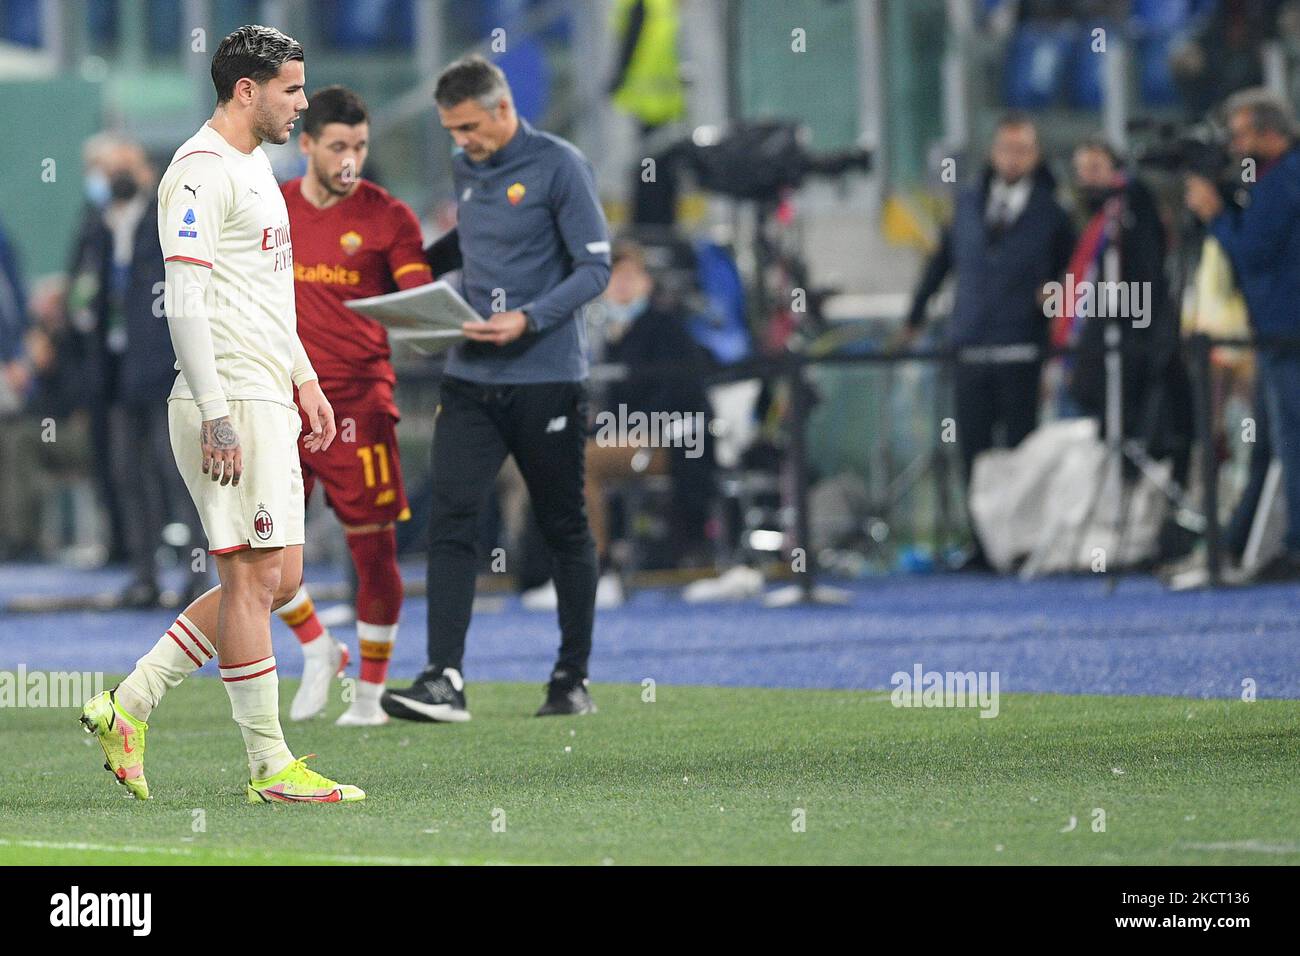 Theo Hernandez of AC Milan leaves the pitch receiving a red card during the Serie A match between AS Roma and AC Milan Calcio at Stadio Olimpico, Rome, Italy on 31 October 2021. (Photo by Giuseppe Maffia/NurPhoto) Stock Photo